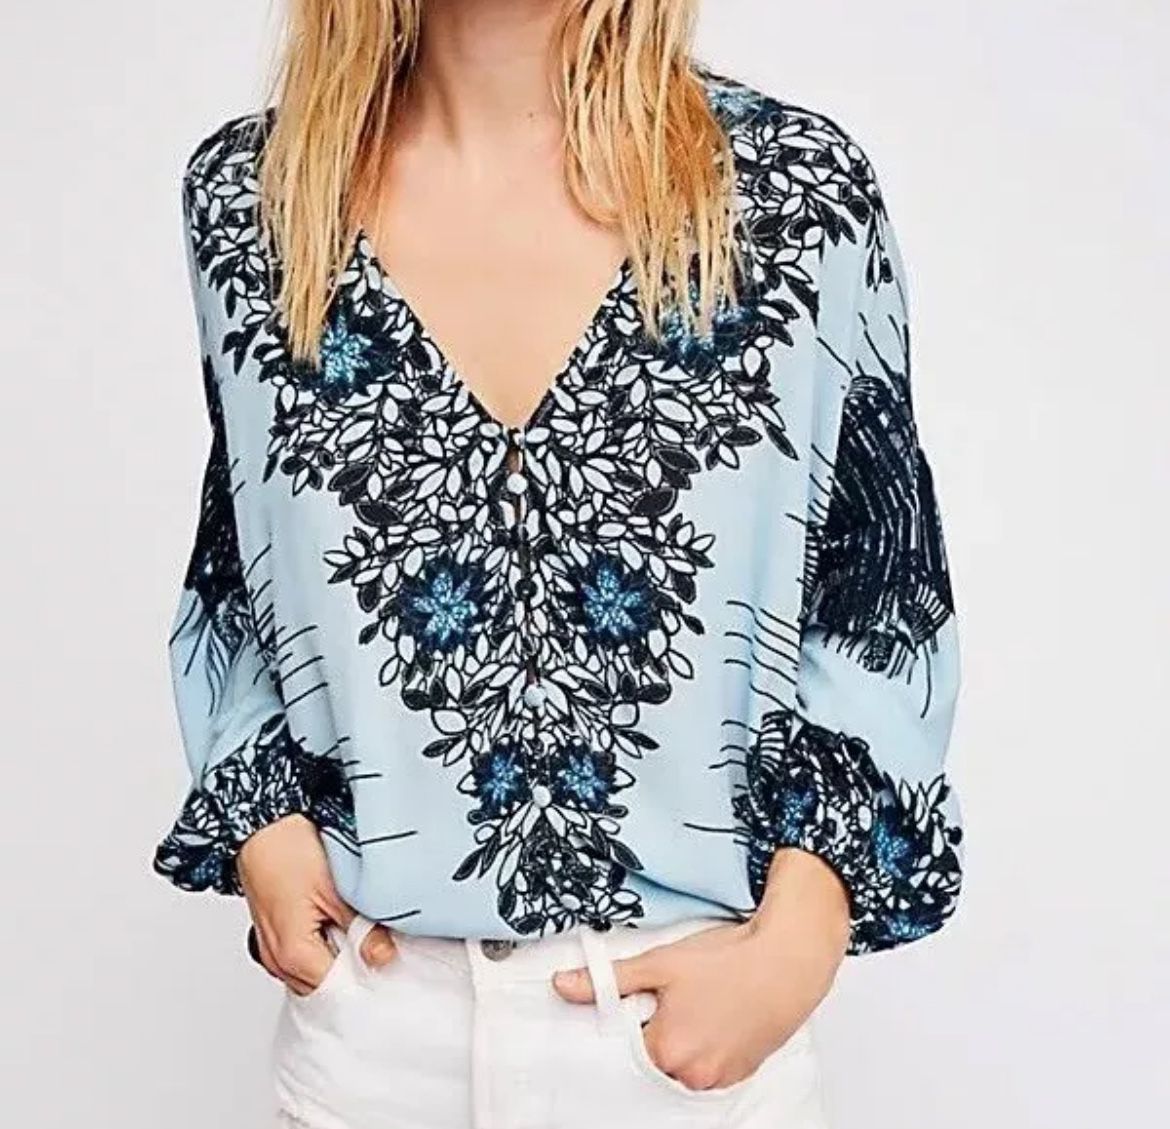 Free People Birds Of A Feather Boho Top